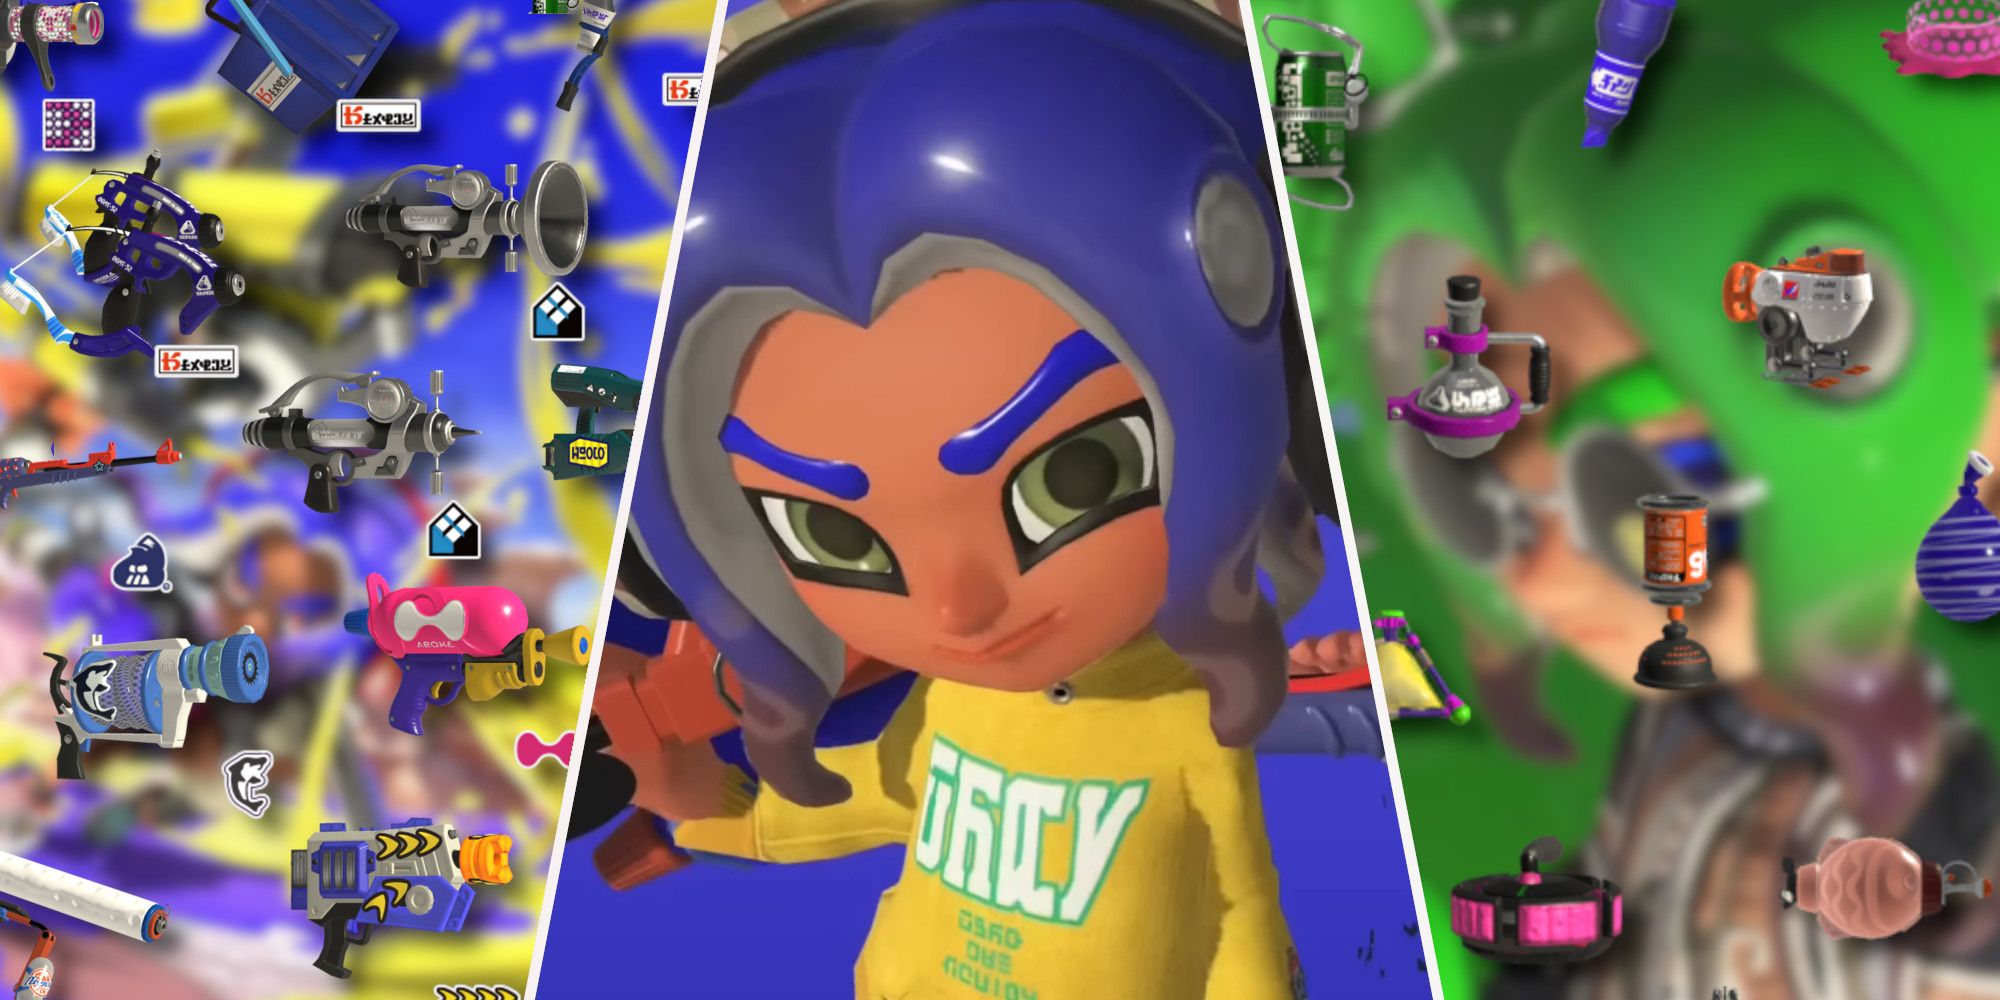 Splatoon 3 Weapons On The Left, Splatoon 3 Sub Weapons on the right, and the promotional art for Splatoon 3 Fresh Season In The Middle